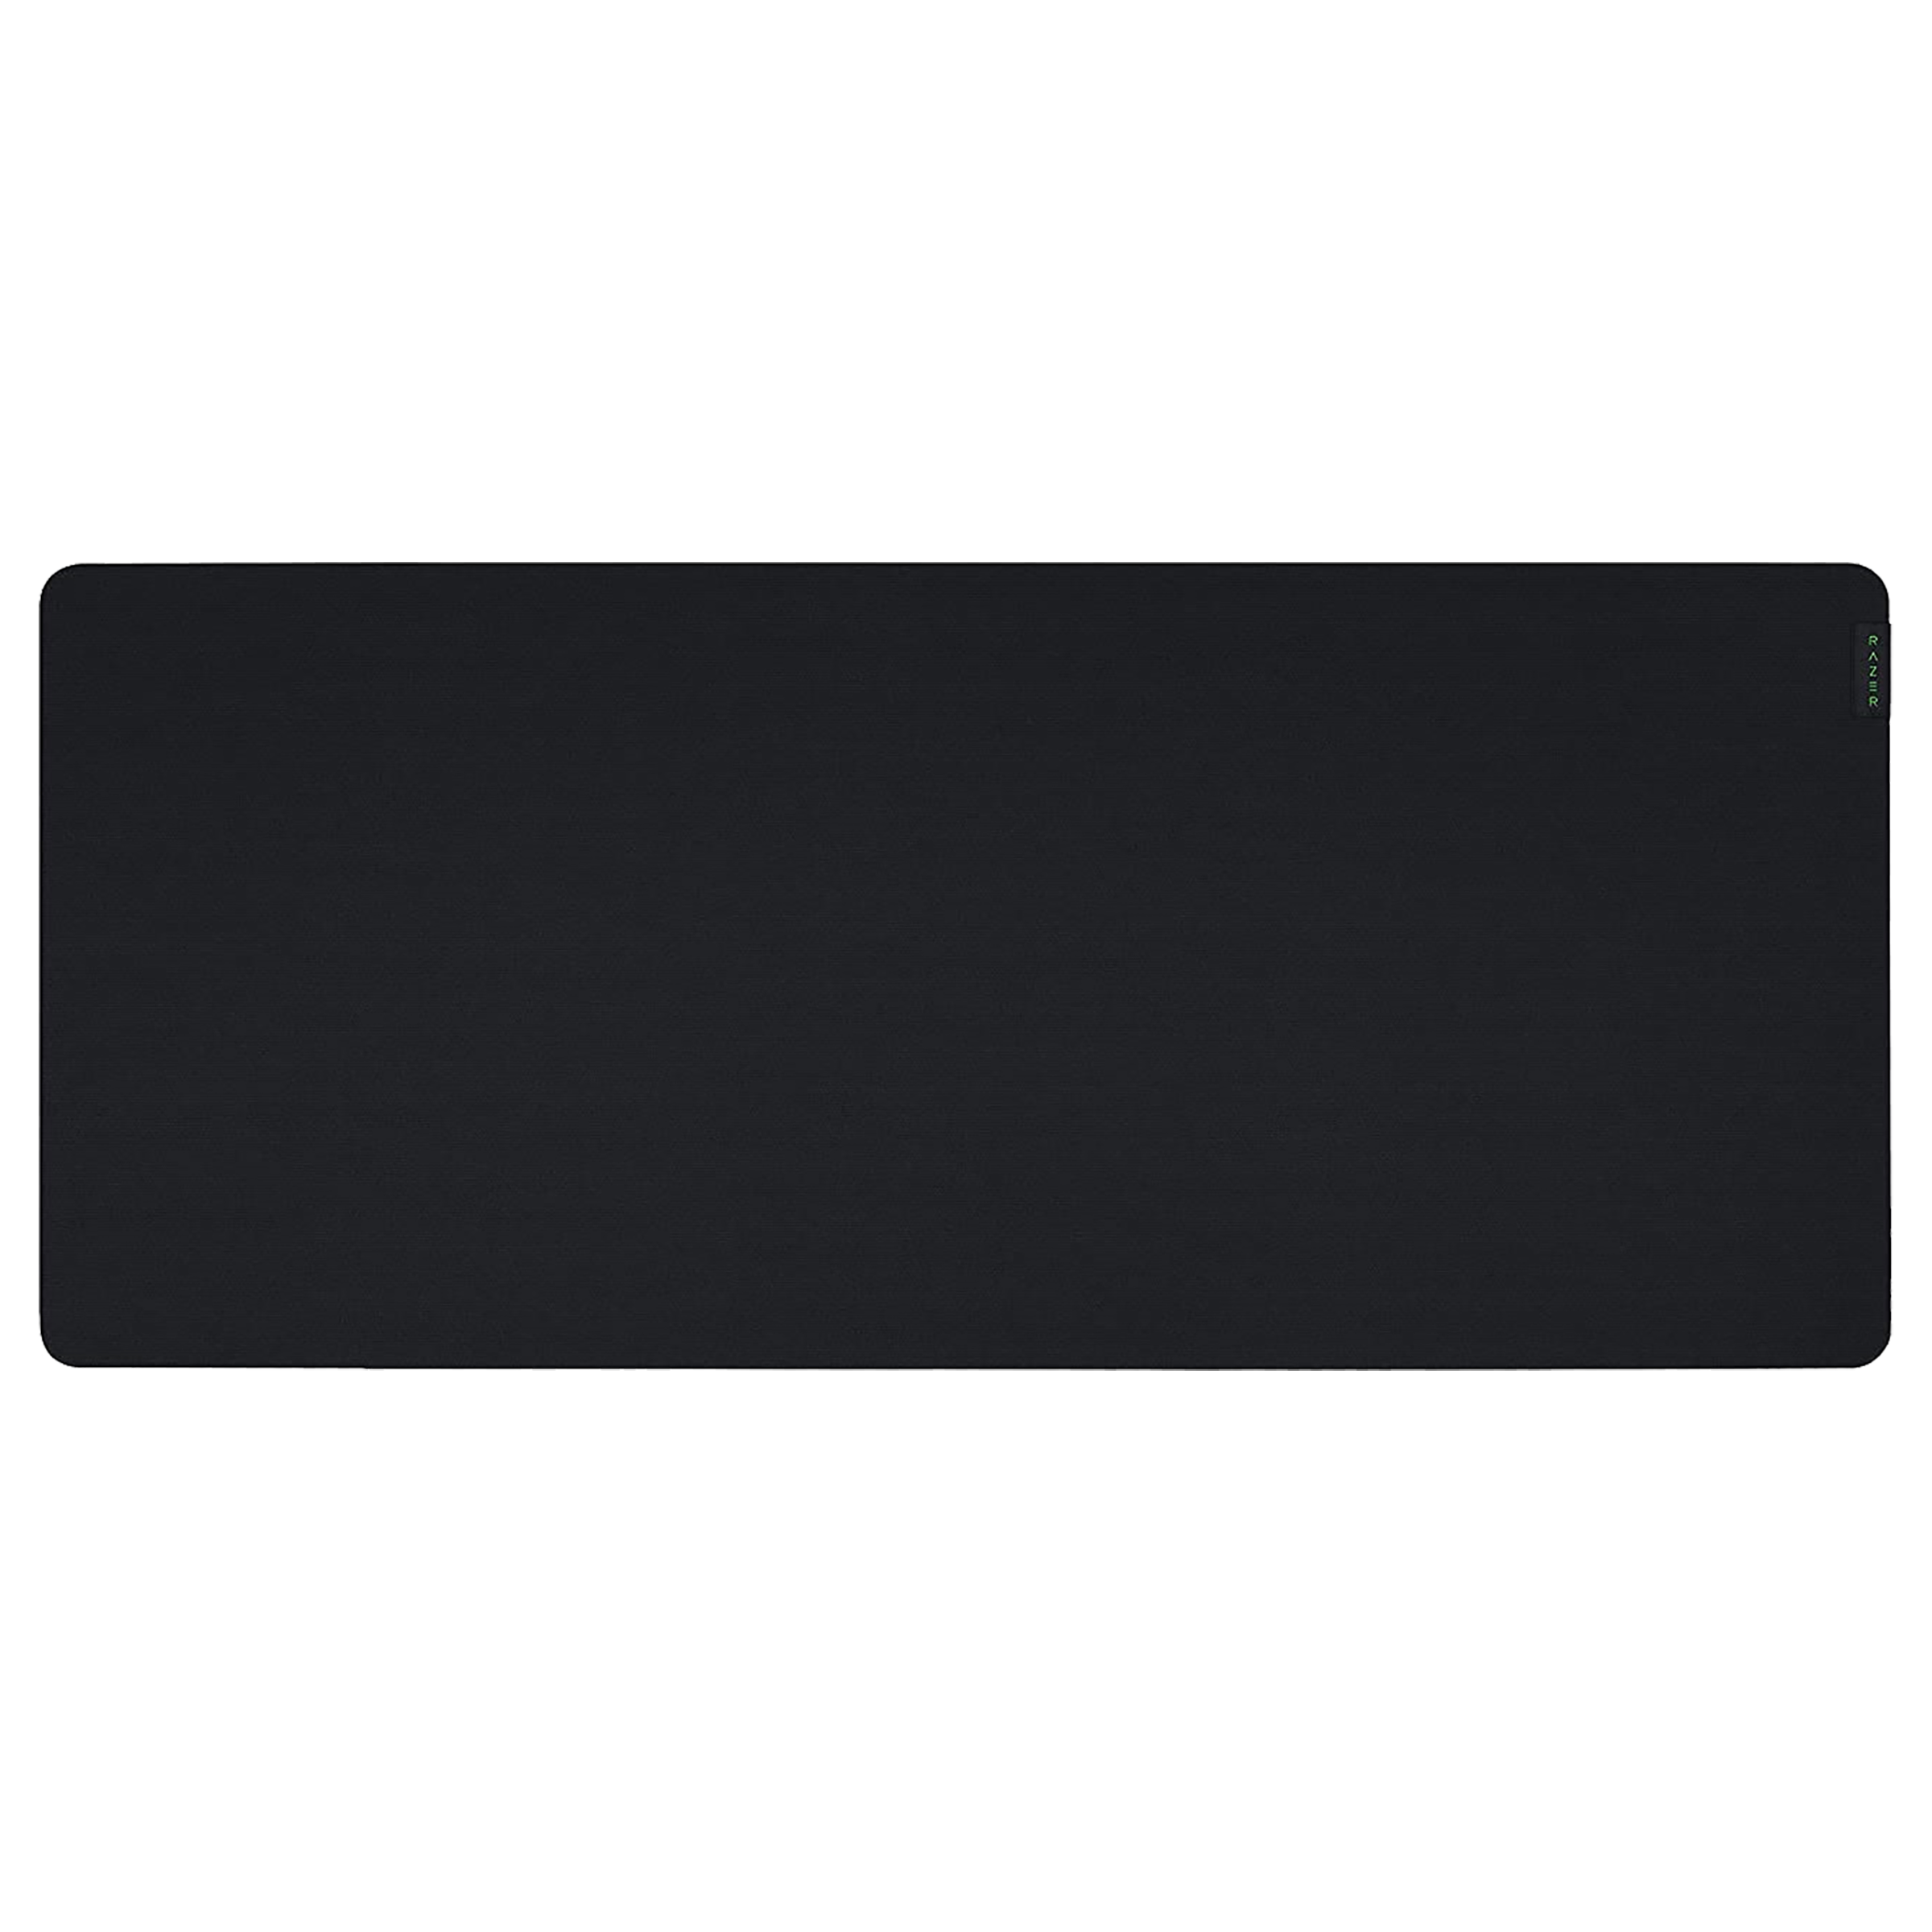 Razer Gigantus Mouse Pad For Mouse (Thick, High-Density Rubber Foam, RZ02-03330400-R3M1, Black)_1